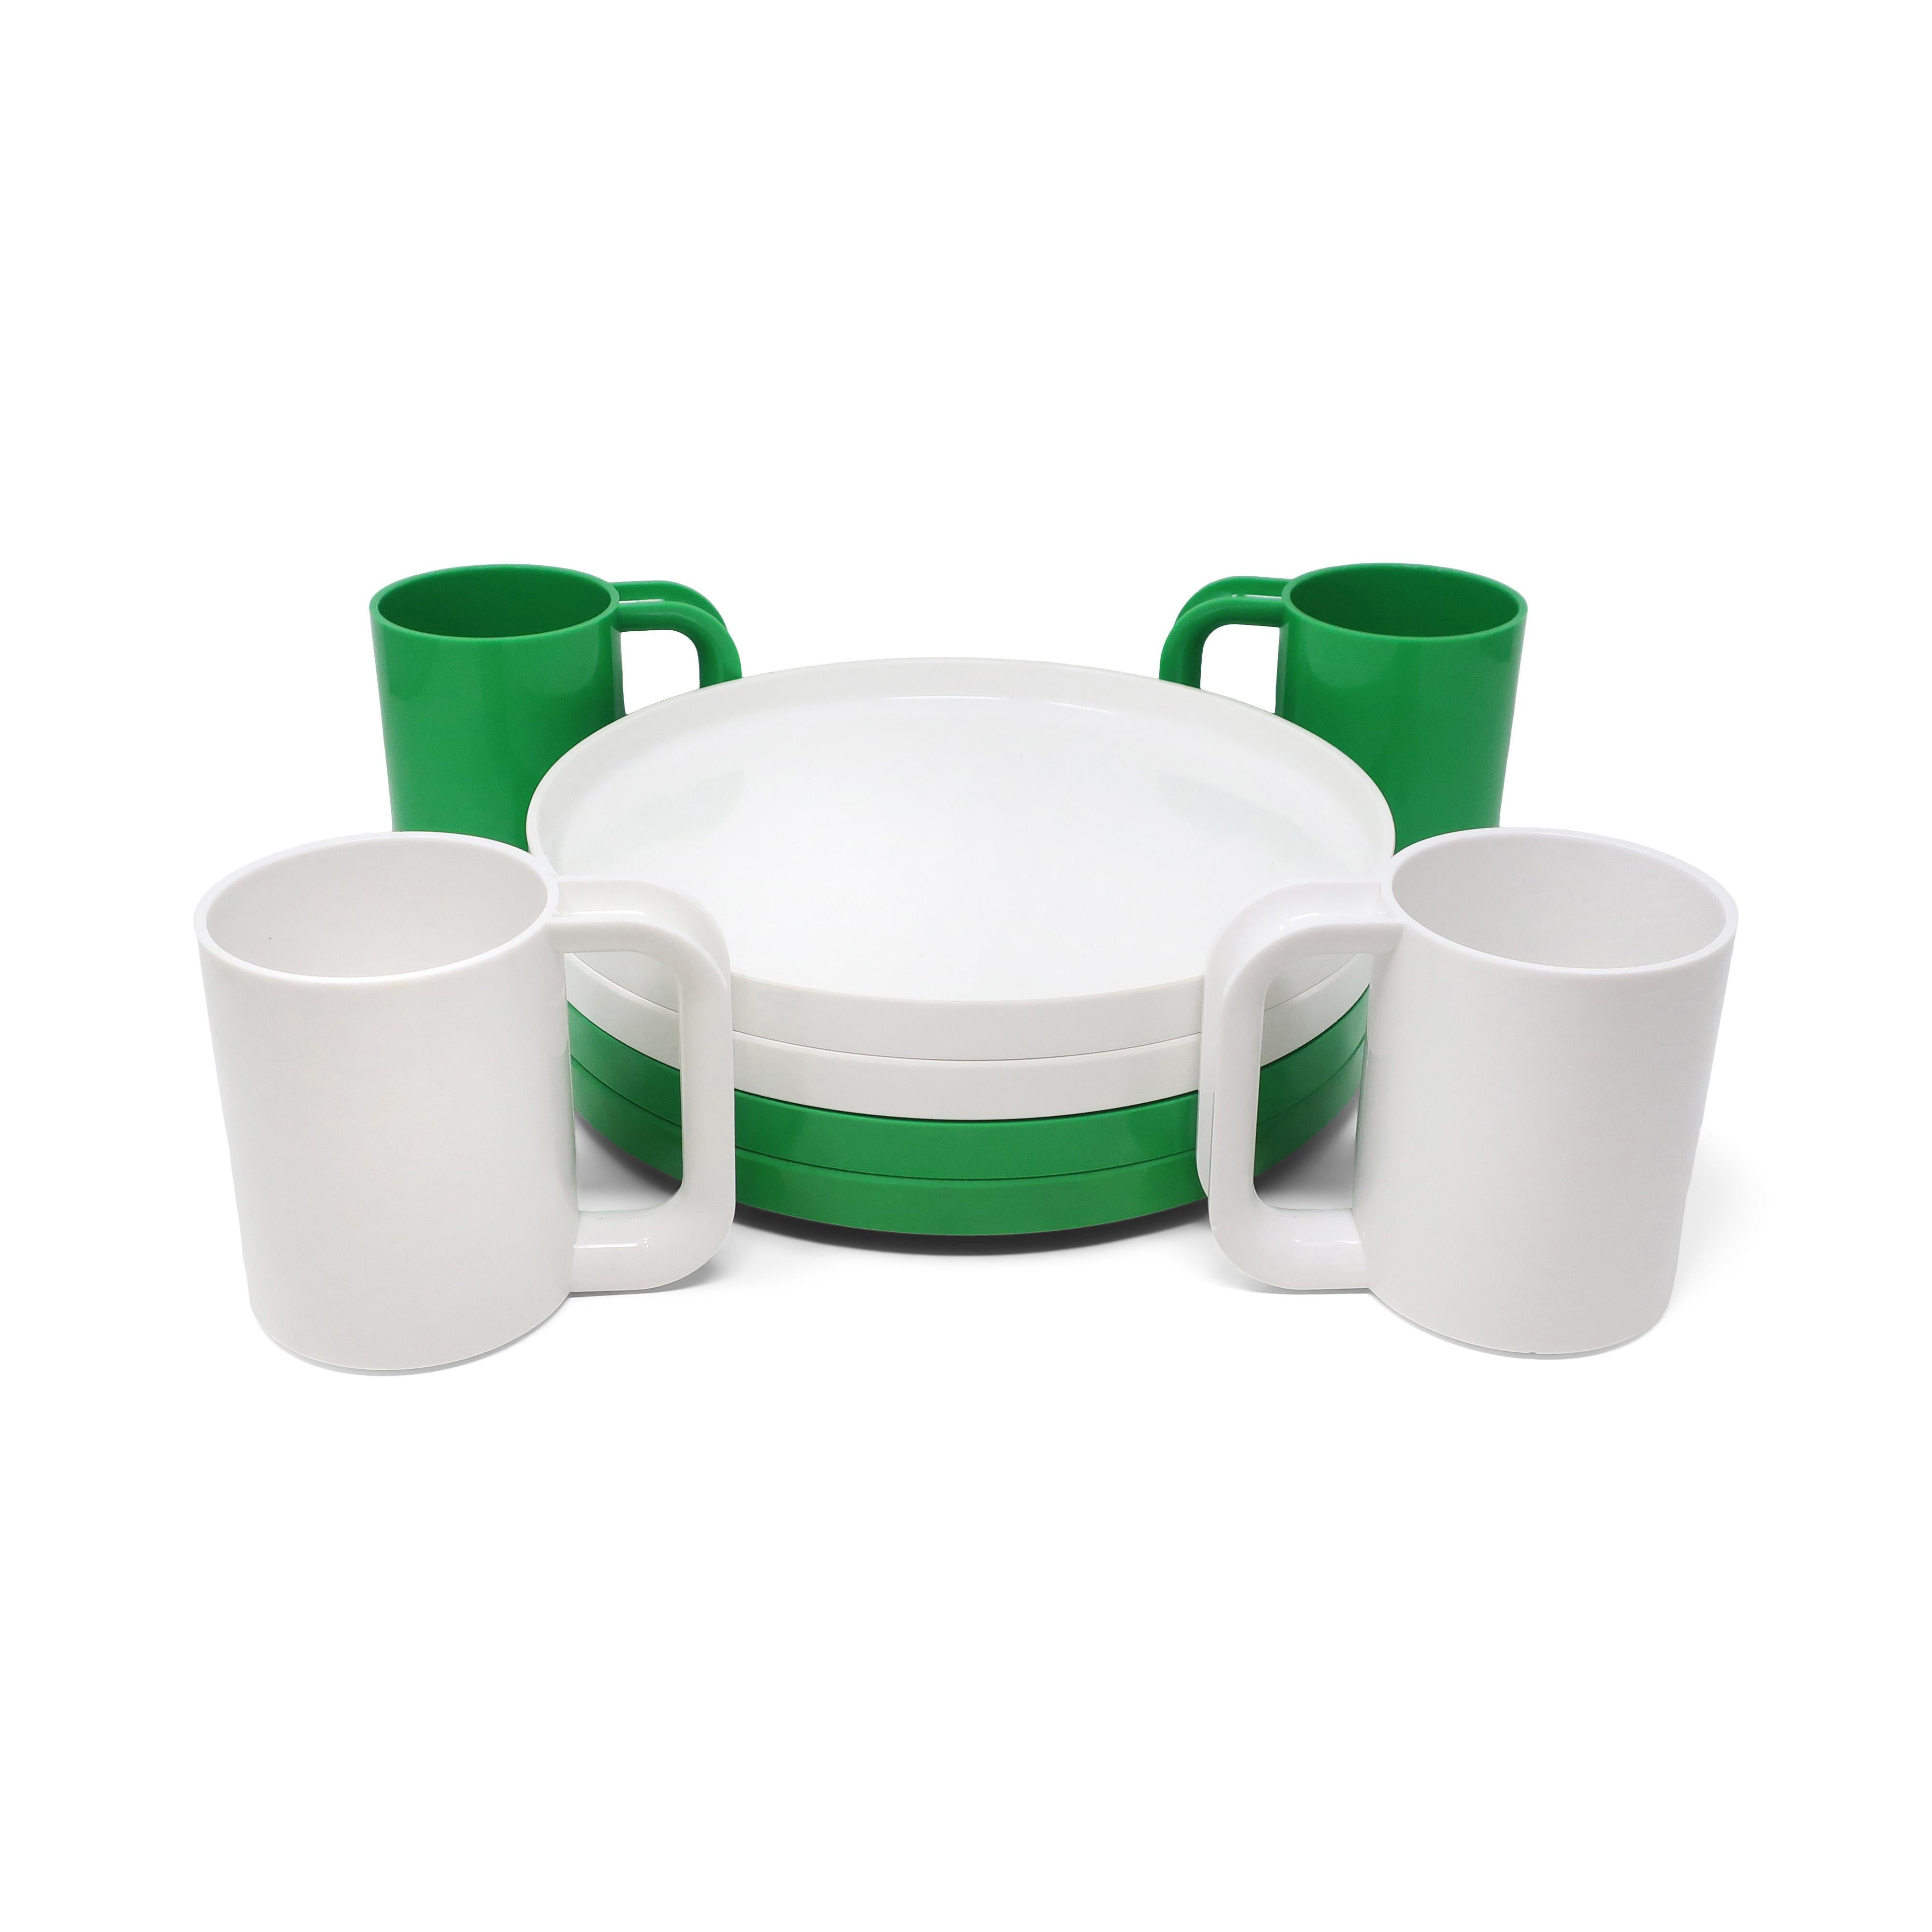 Winner of the prestigious Compasso d'Oro award for Good Design in 1964, Massimo Vignelli's iconic dinnerware for Heller (likely designed with his equally talented wife Lella) has been in near constant production for over 50 years. This is 8 piece